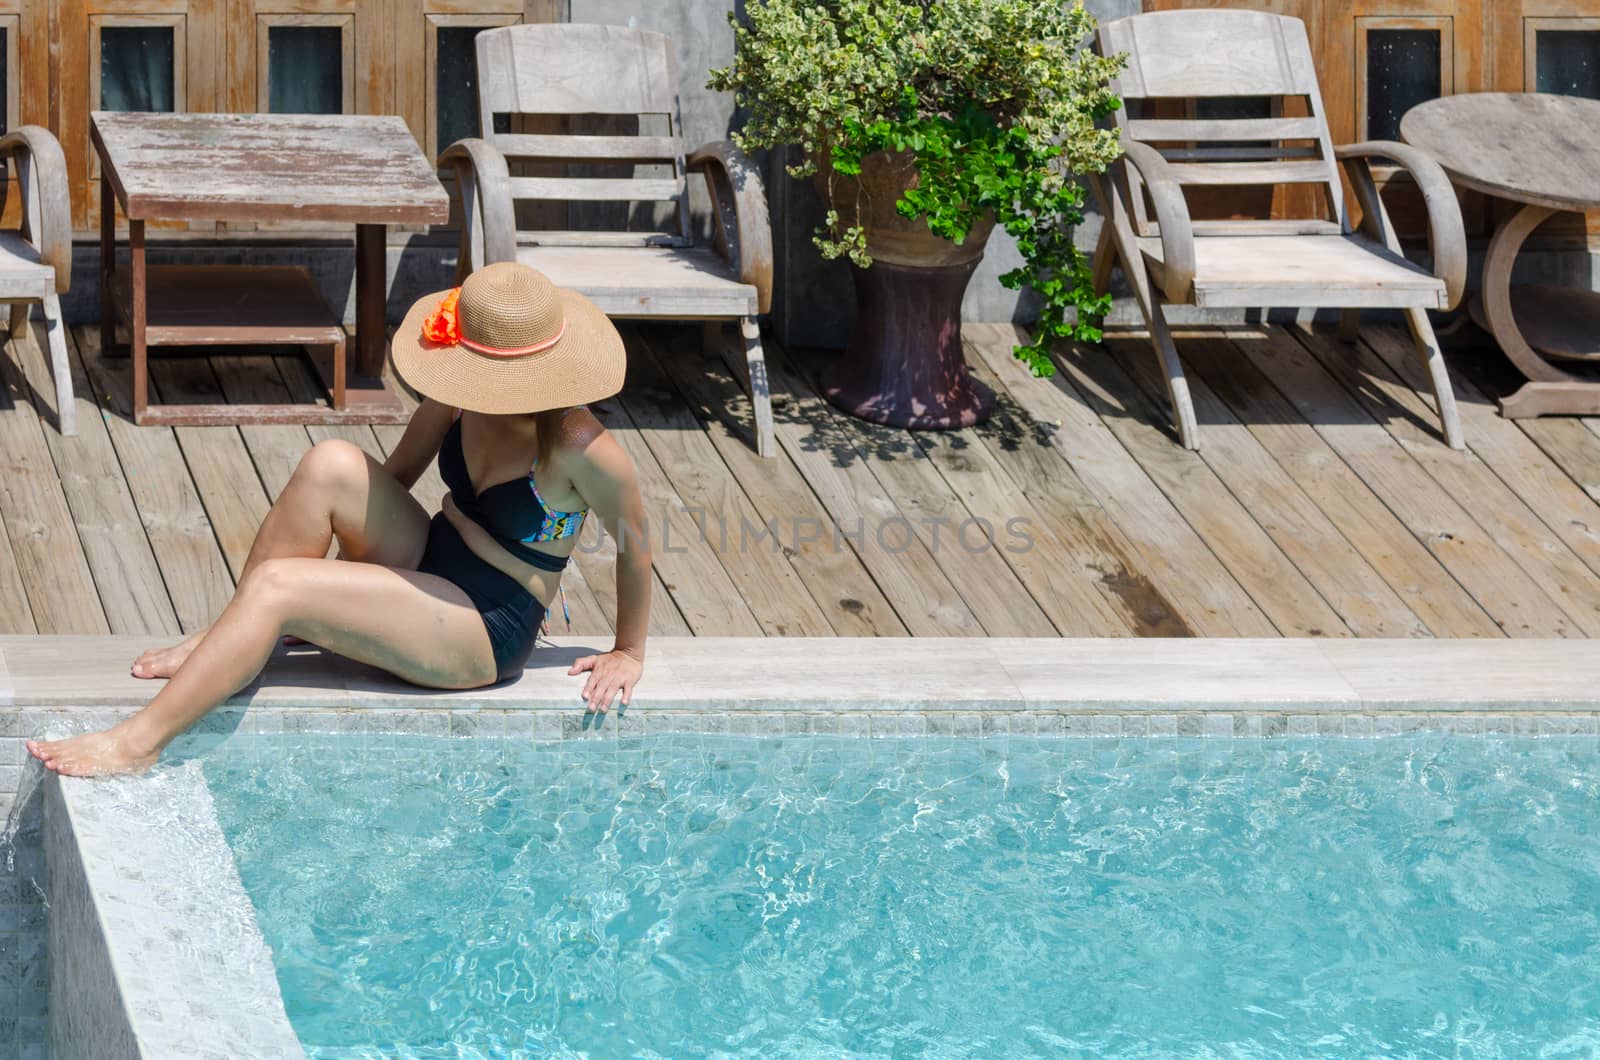 Beautiful young woman sitting by the pool wearing a brown hat.